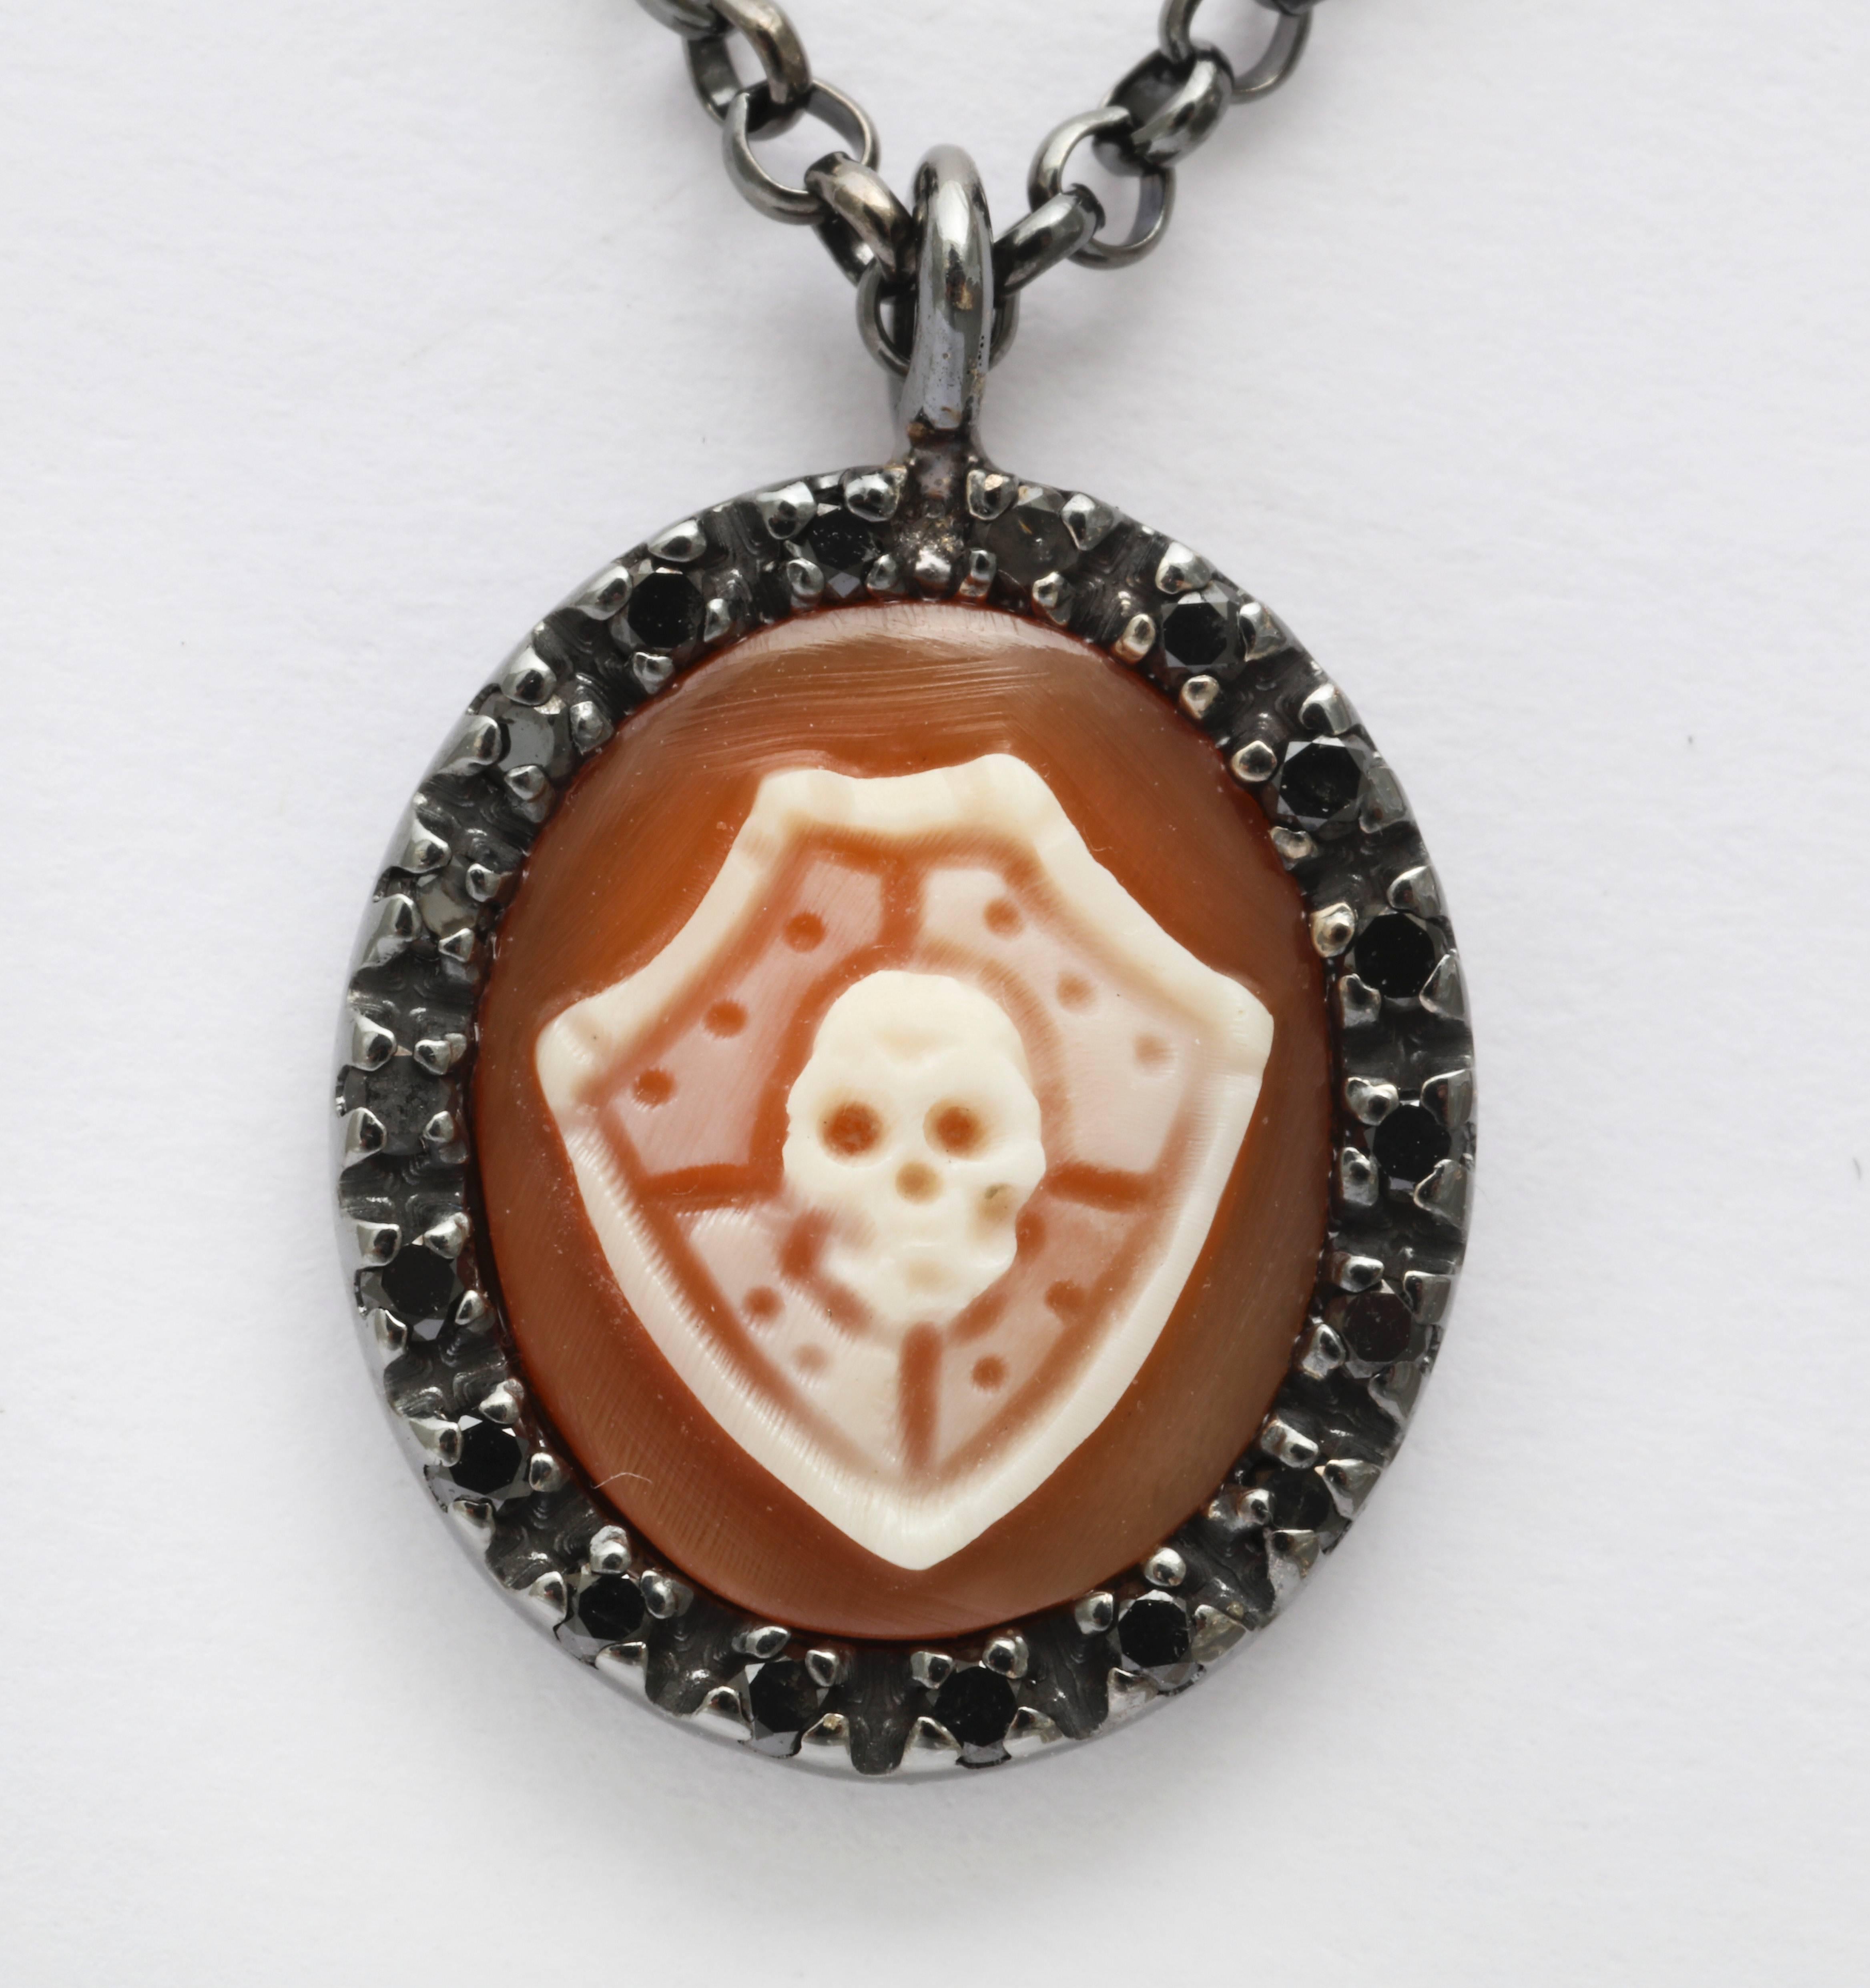 12mm cornelian shell cameo, hand-carved set in sterling silver black rhodium plated with black diamonds.
Chain lenght: 24".